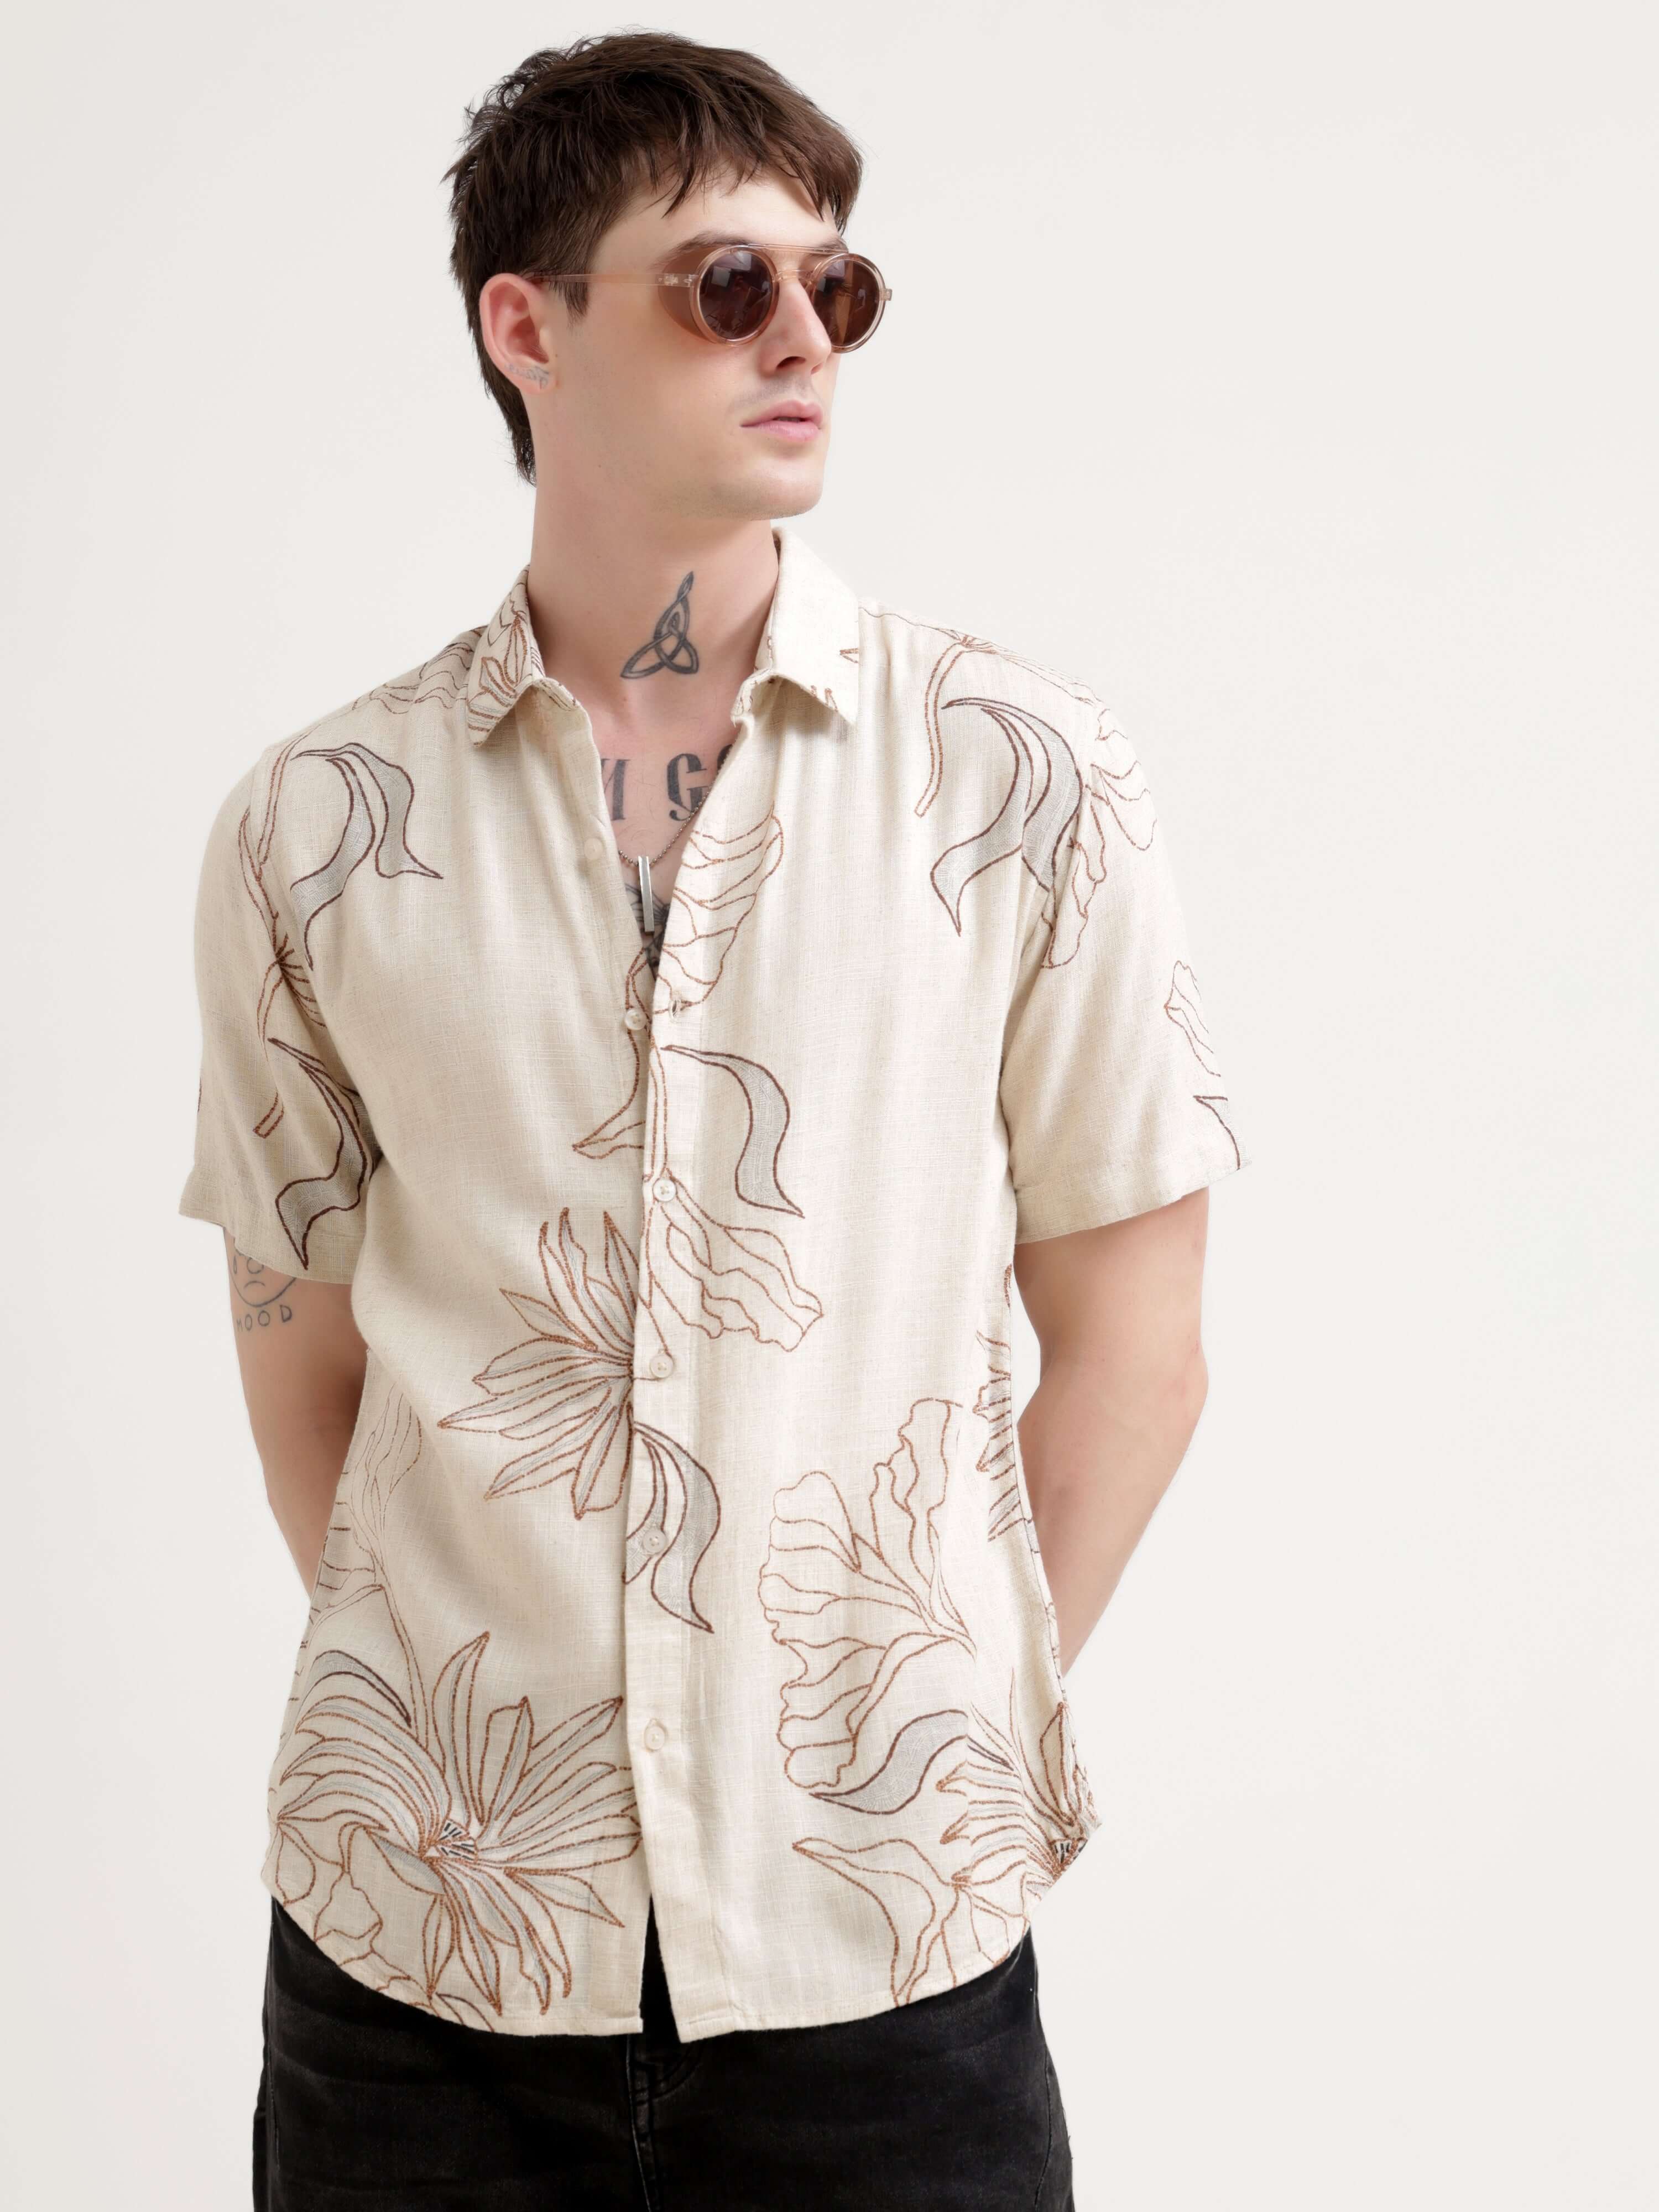 Floral printed beige half sleeve shirt - Men's Casual Wear shop online at Estilocus. Dive into summer with our Beige Floral Half Sleeve Shirt. Perfect for Hawaiian vibes & streetwear looks. Light, oversized & totally stylish!